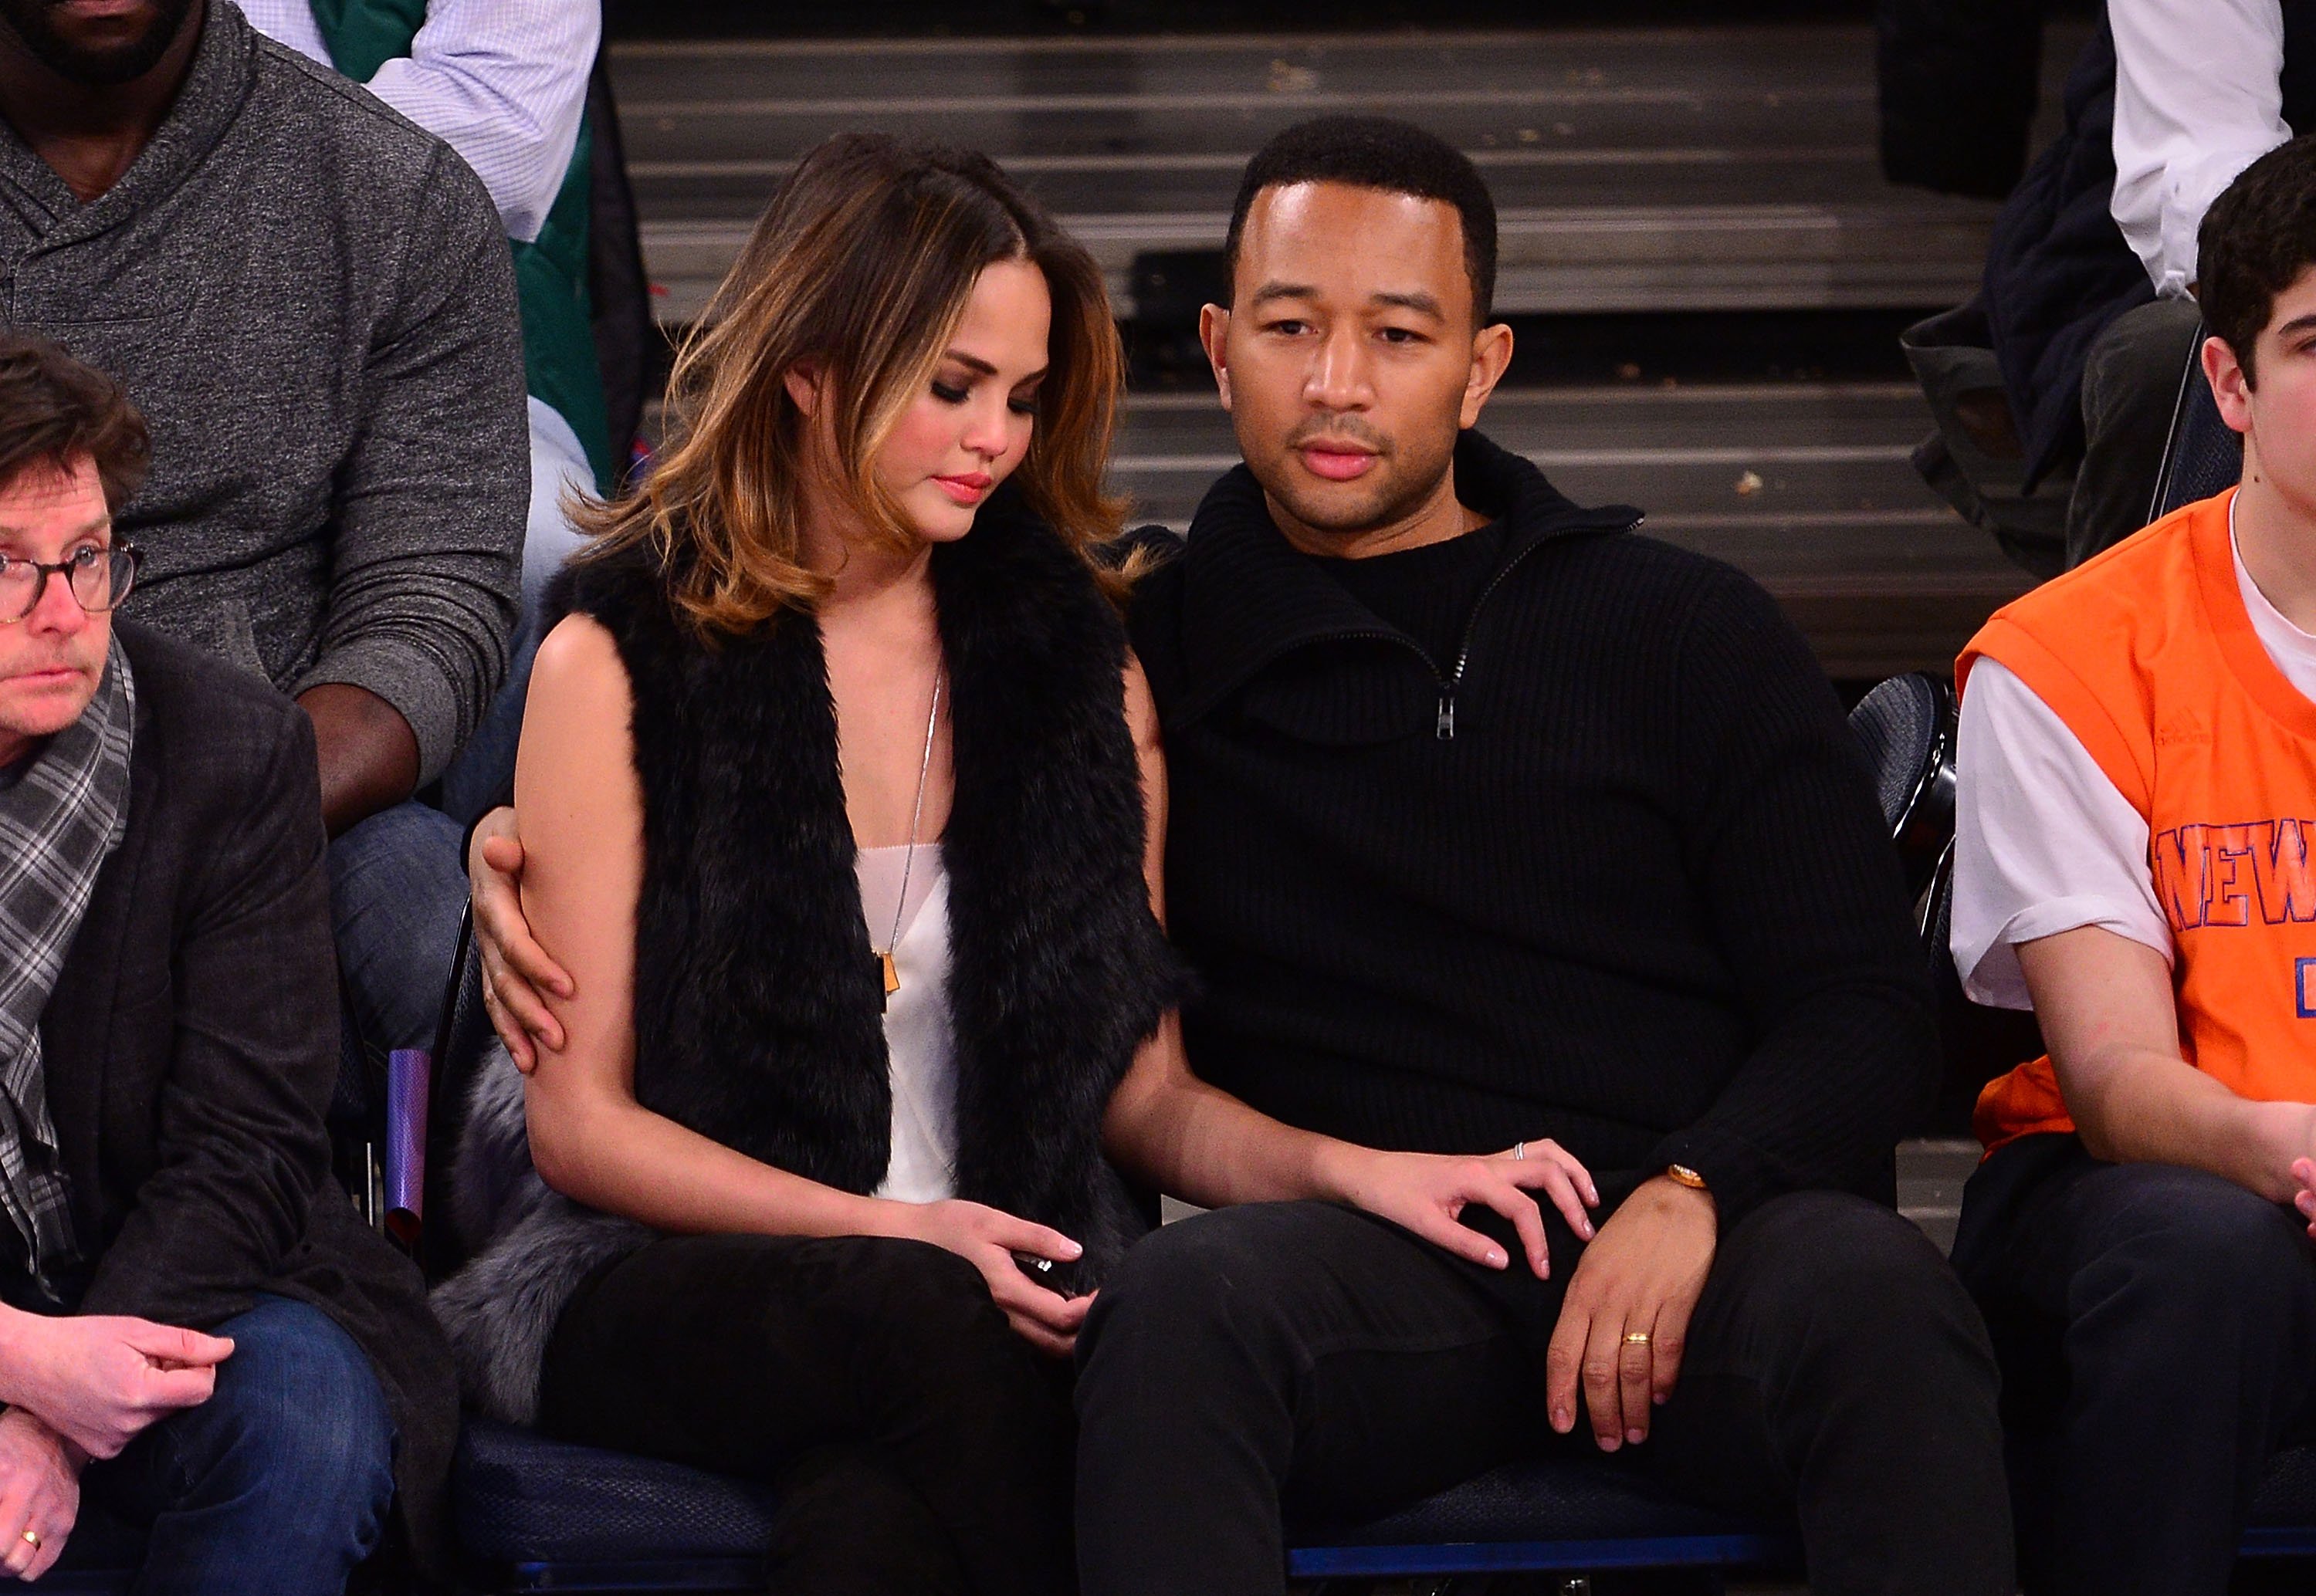 Christine Teigen and John Legend attend the Brooklyn Nets vs New York Knicks game at Madison Square Garden on January 20, 2014 in New York City | Source: Getty Images 